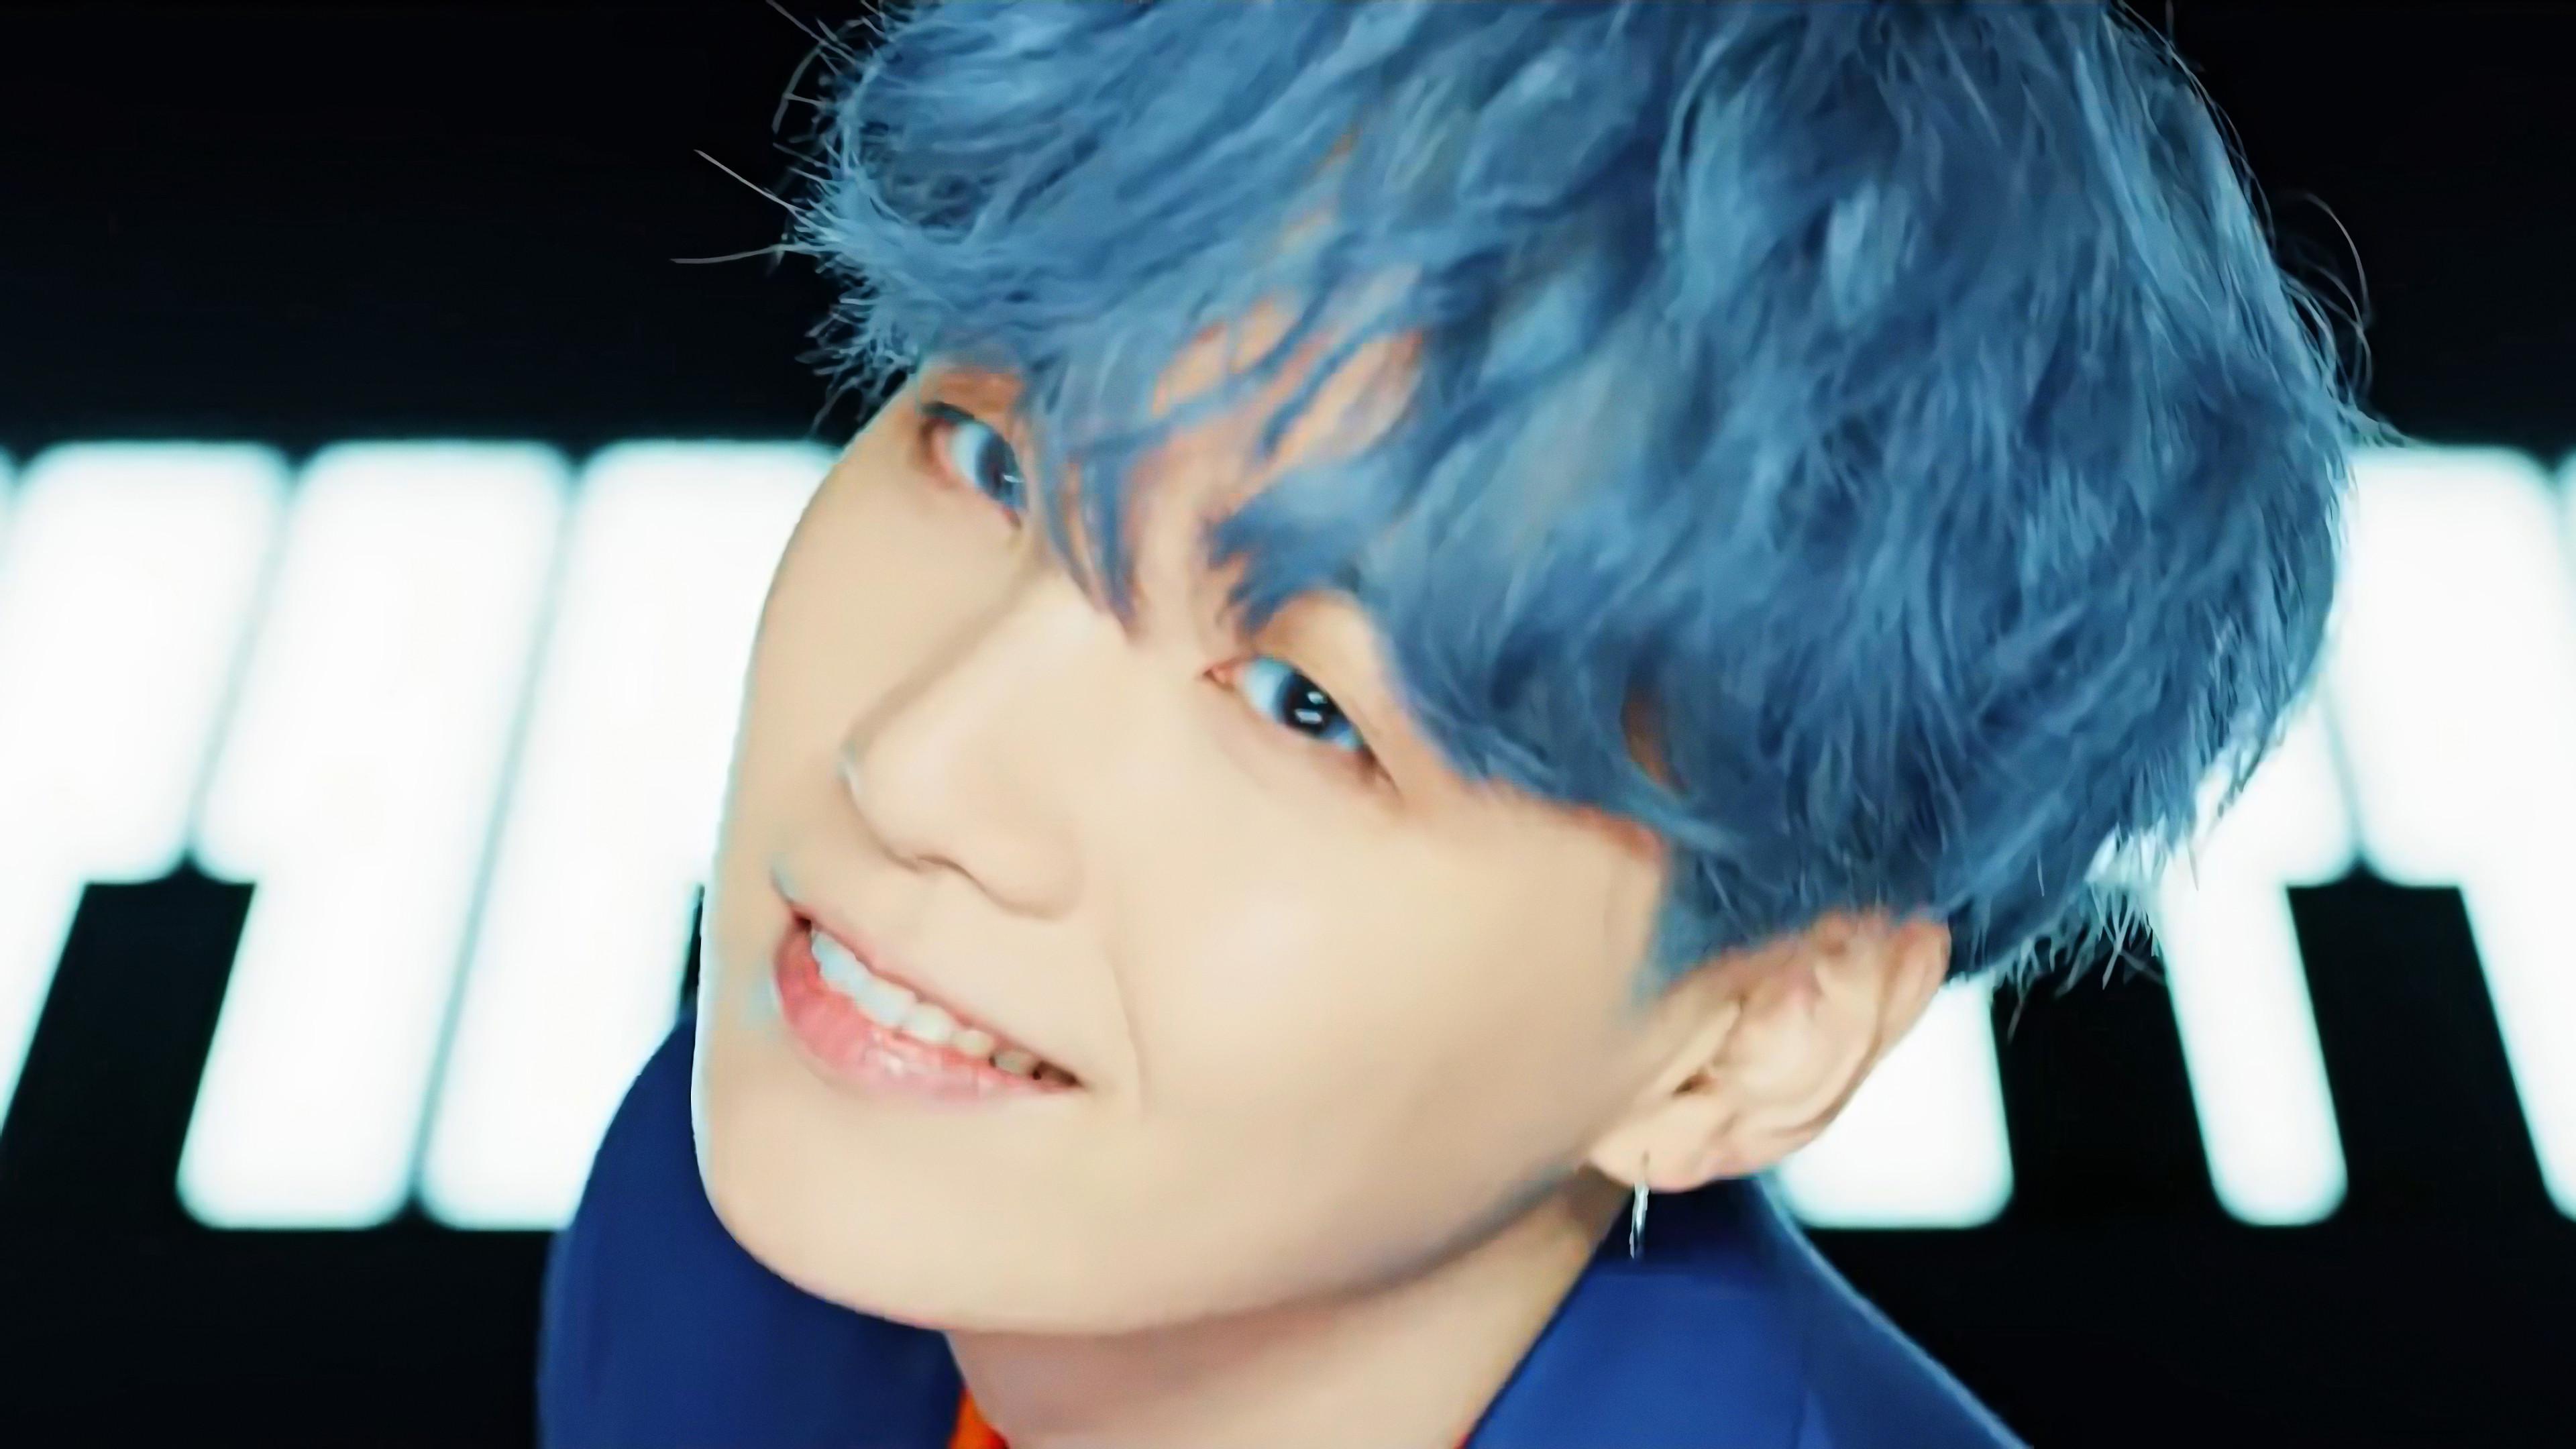 BTS' Suga's Blue Hair in "Boy With Luv" Music Video - wide 5